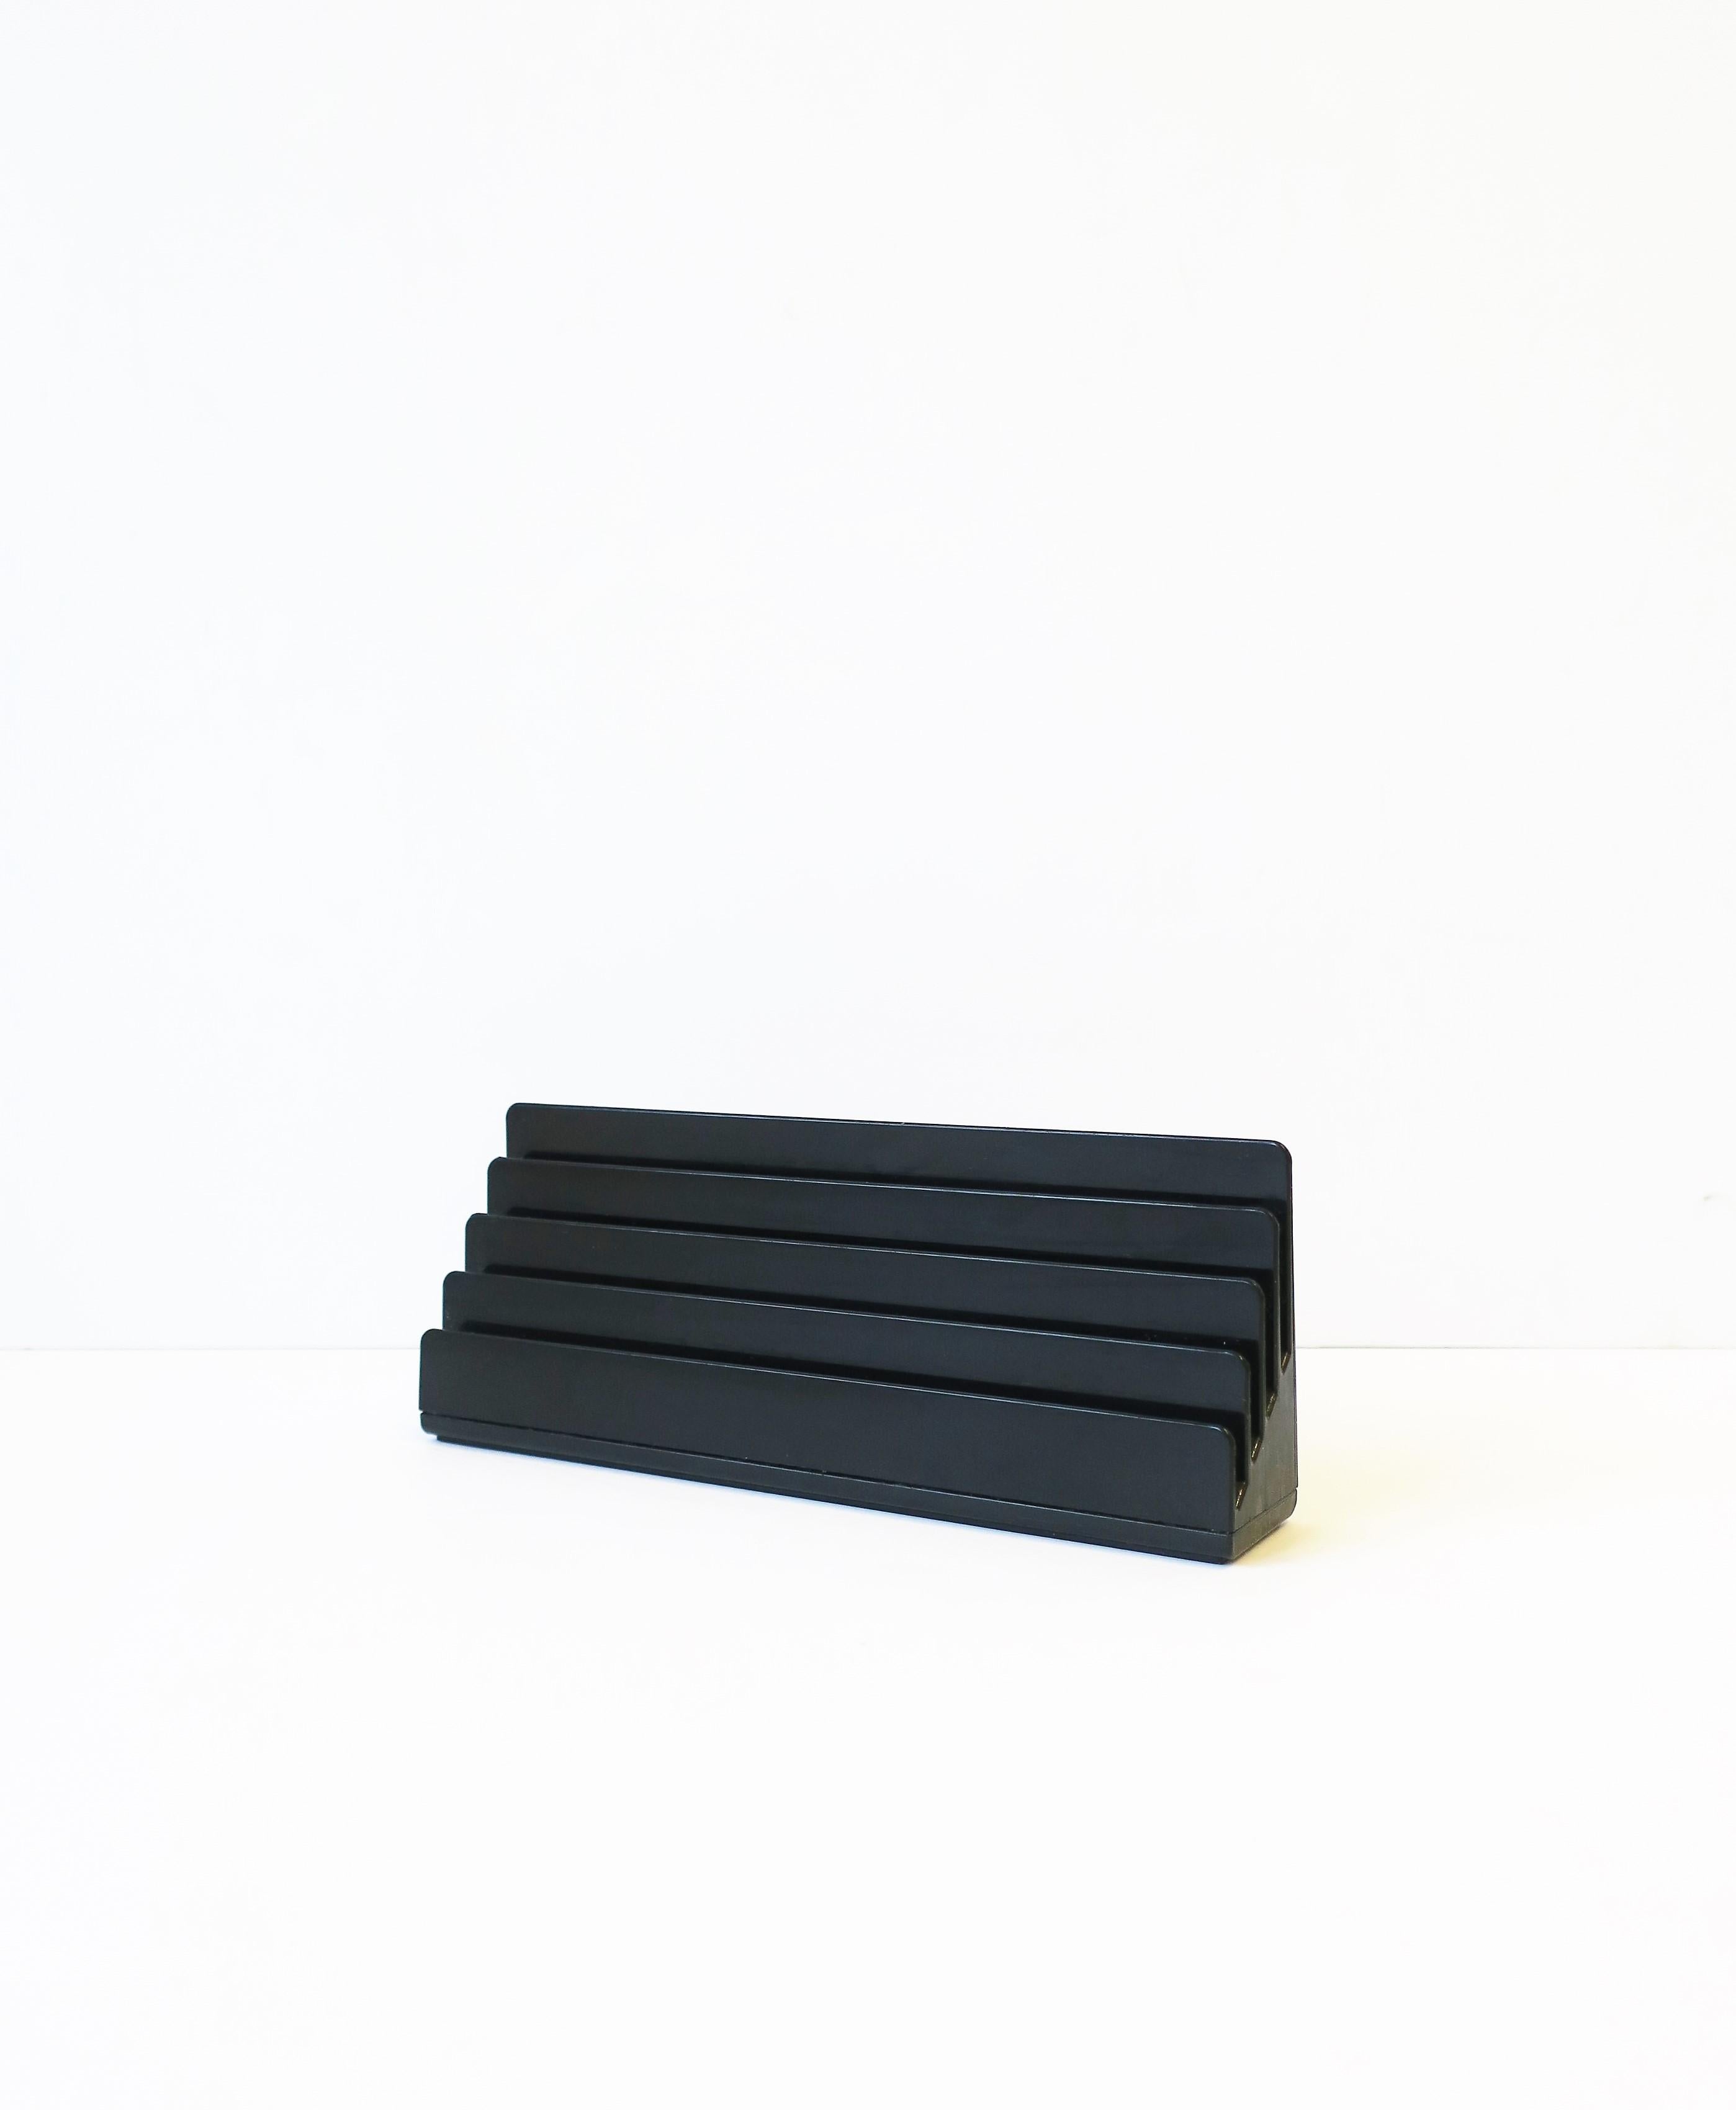 An Italian Postmodern black letter holder or desk organizer by designer Rino Pirovano for Rexite, Italy, circa late-20th century. Piece is marked on bottom as shown in images #9 and 10; 